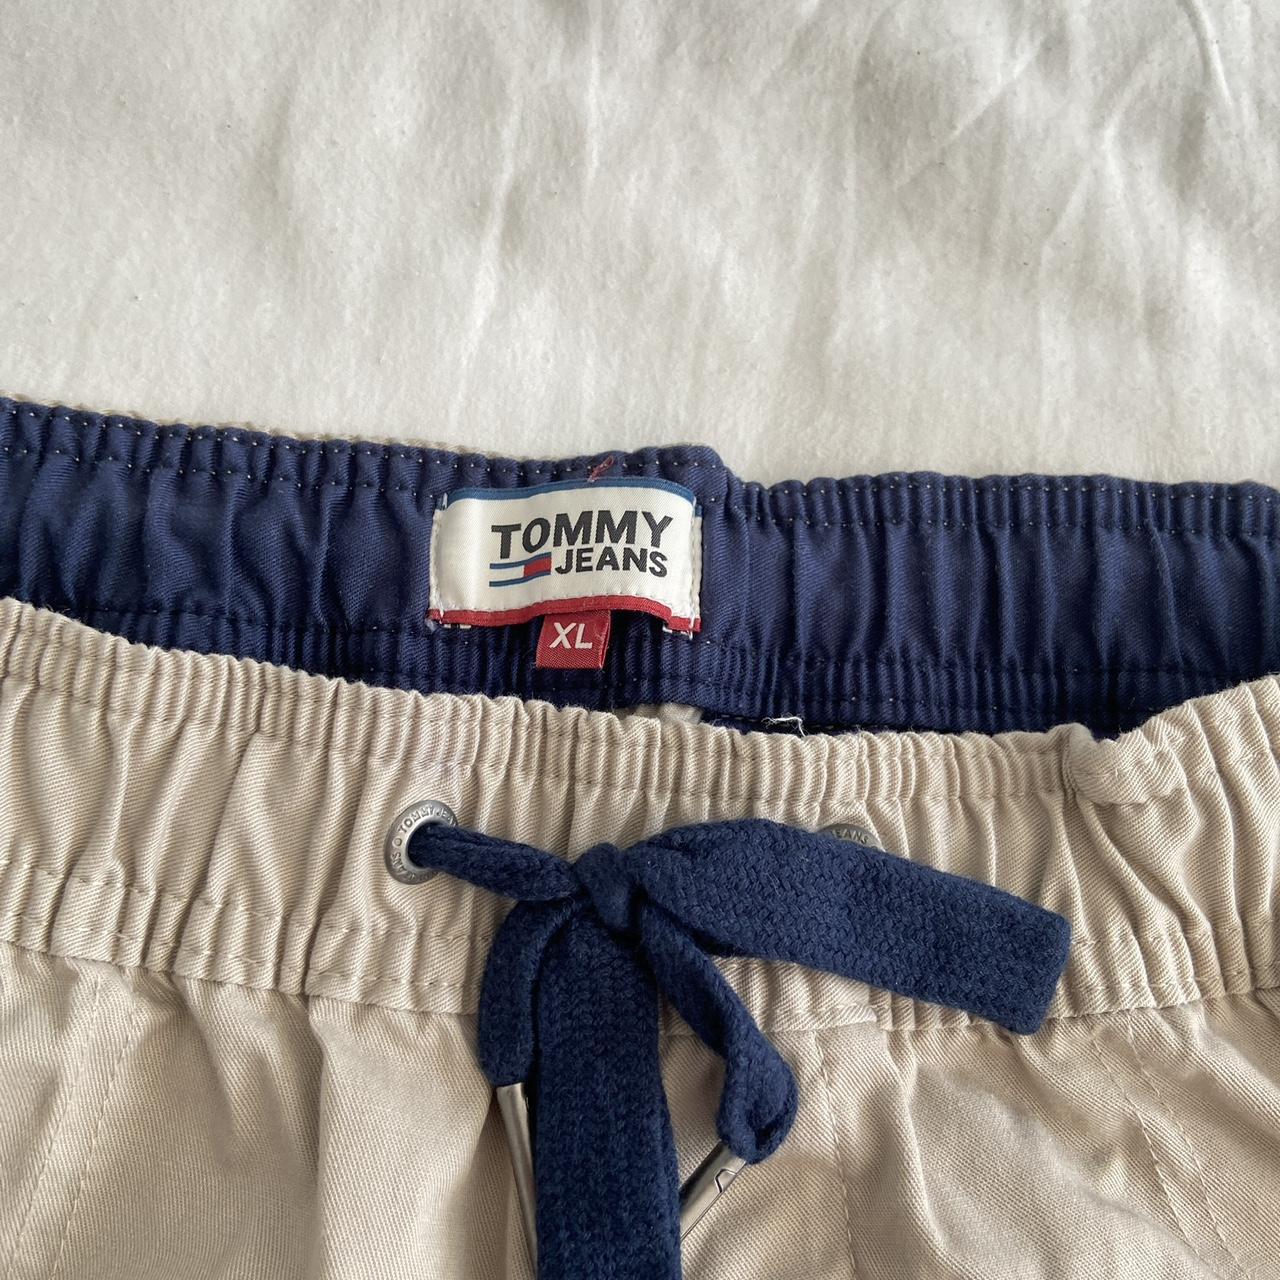 Tommy Jeans Cargos No flaws Size - XL #cargos... - Depop